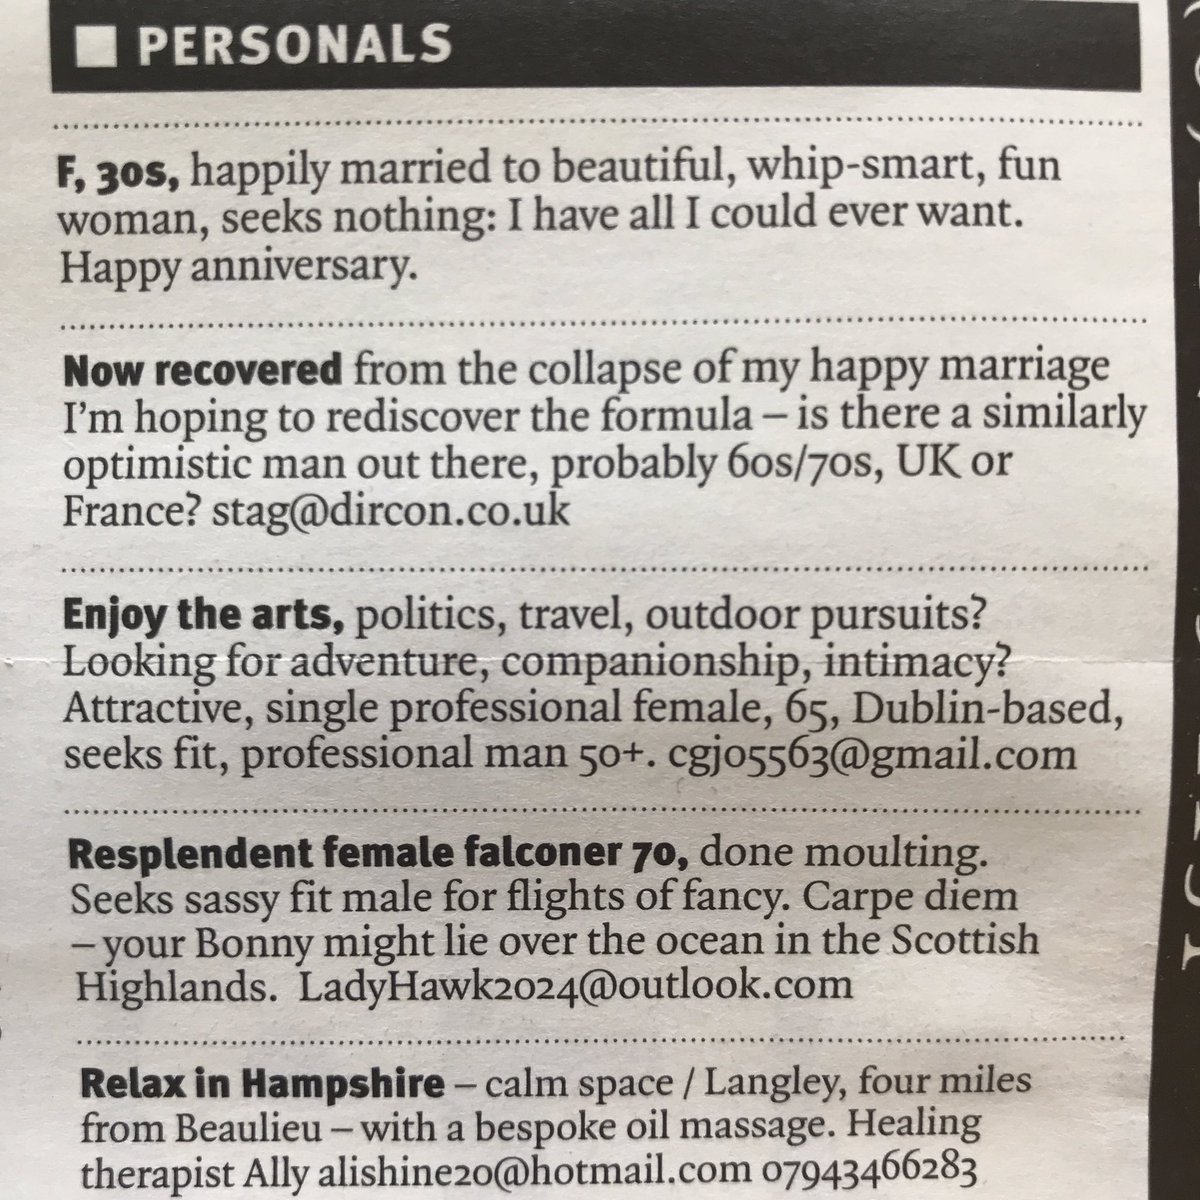 The personals section in the latest @LRB has got something for everyone